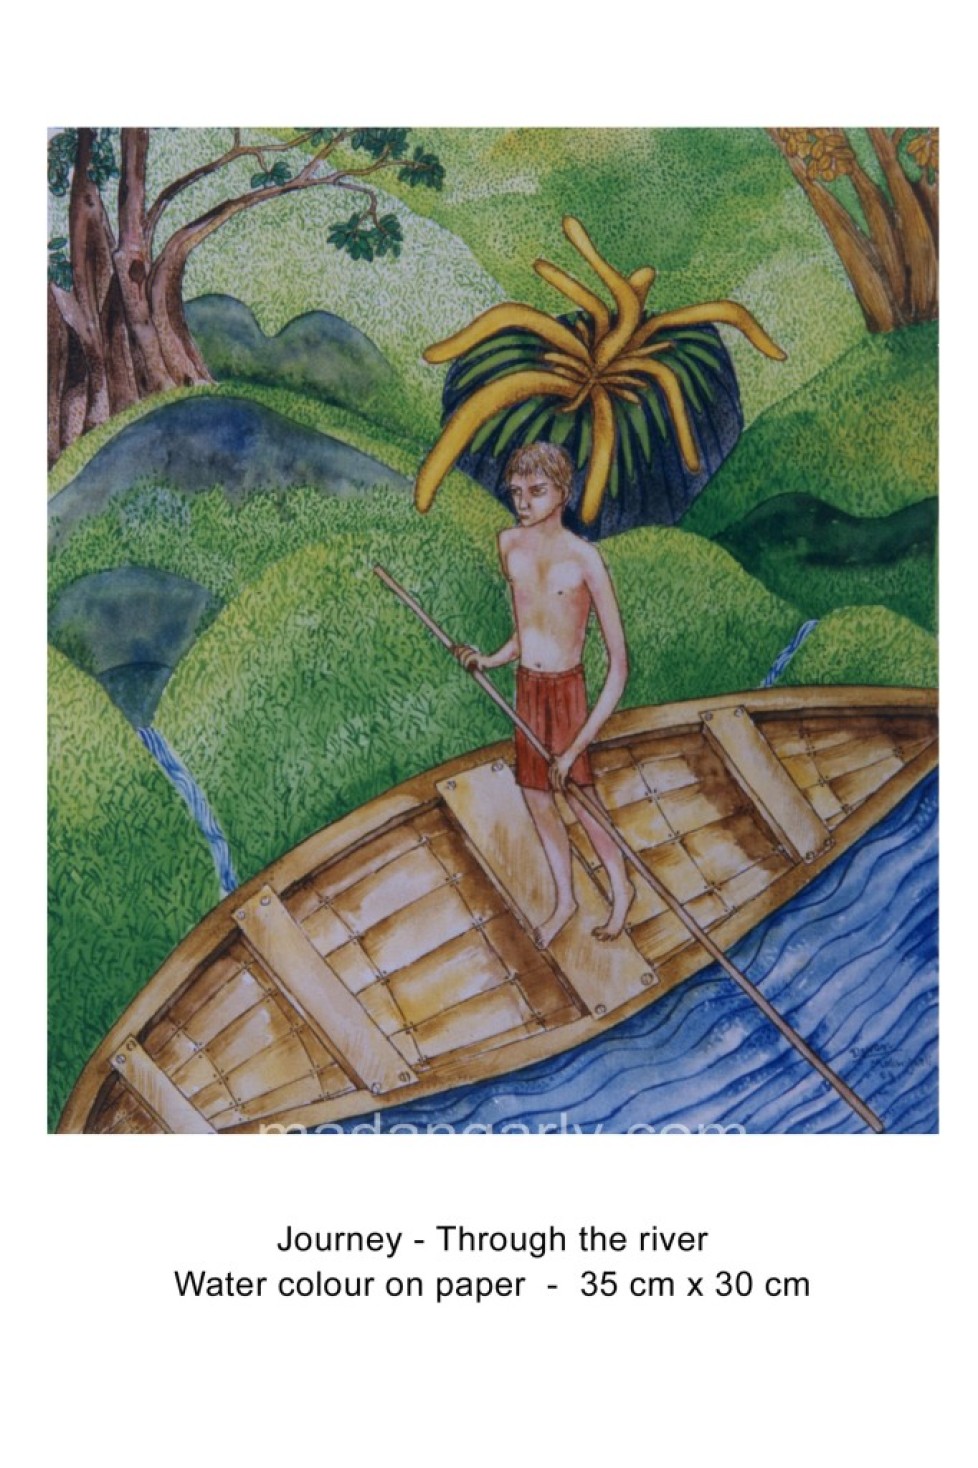 2006 Paintings – Water Color on Paper